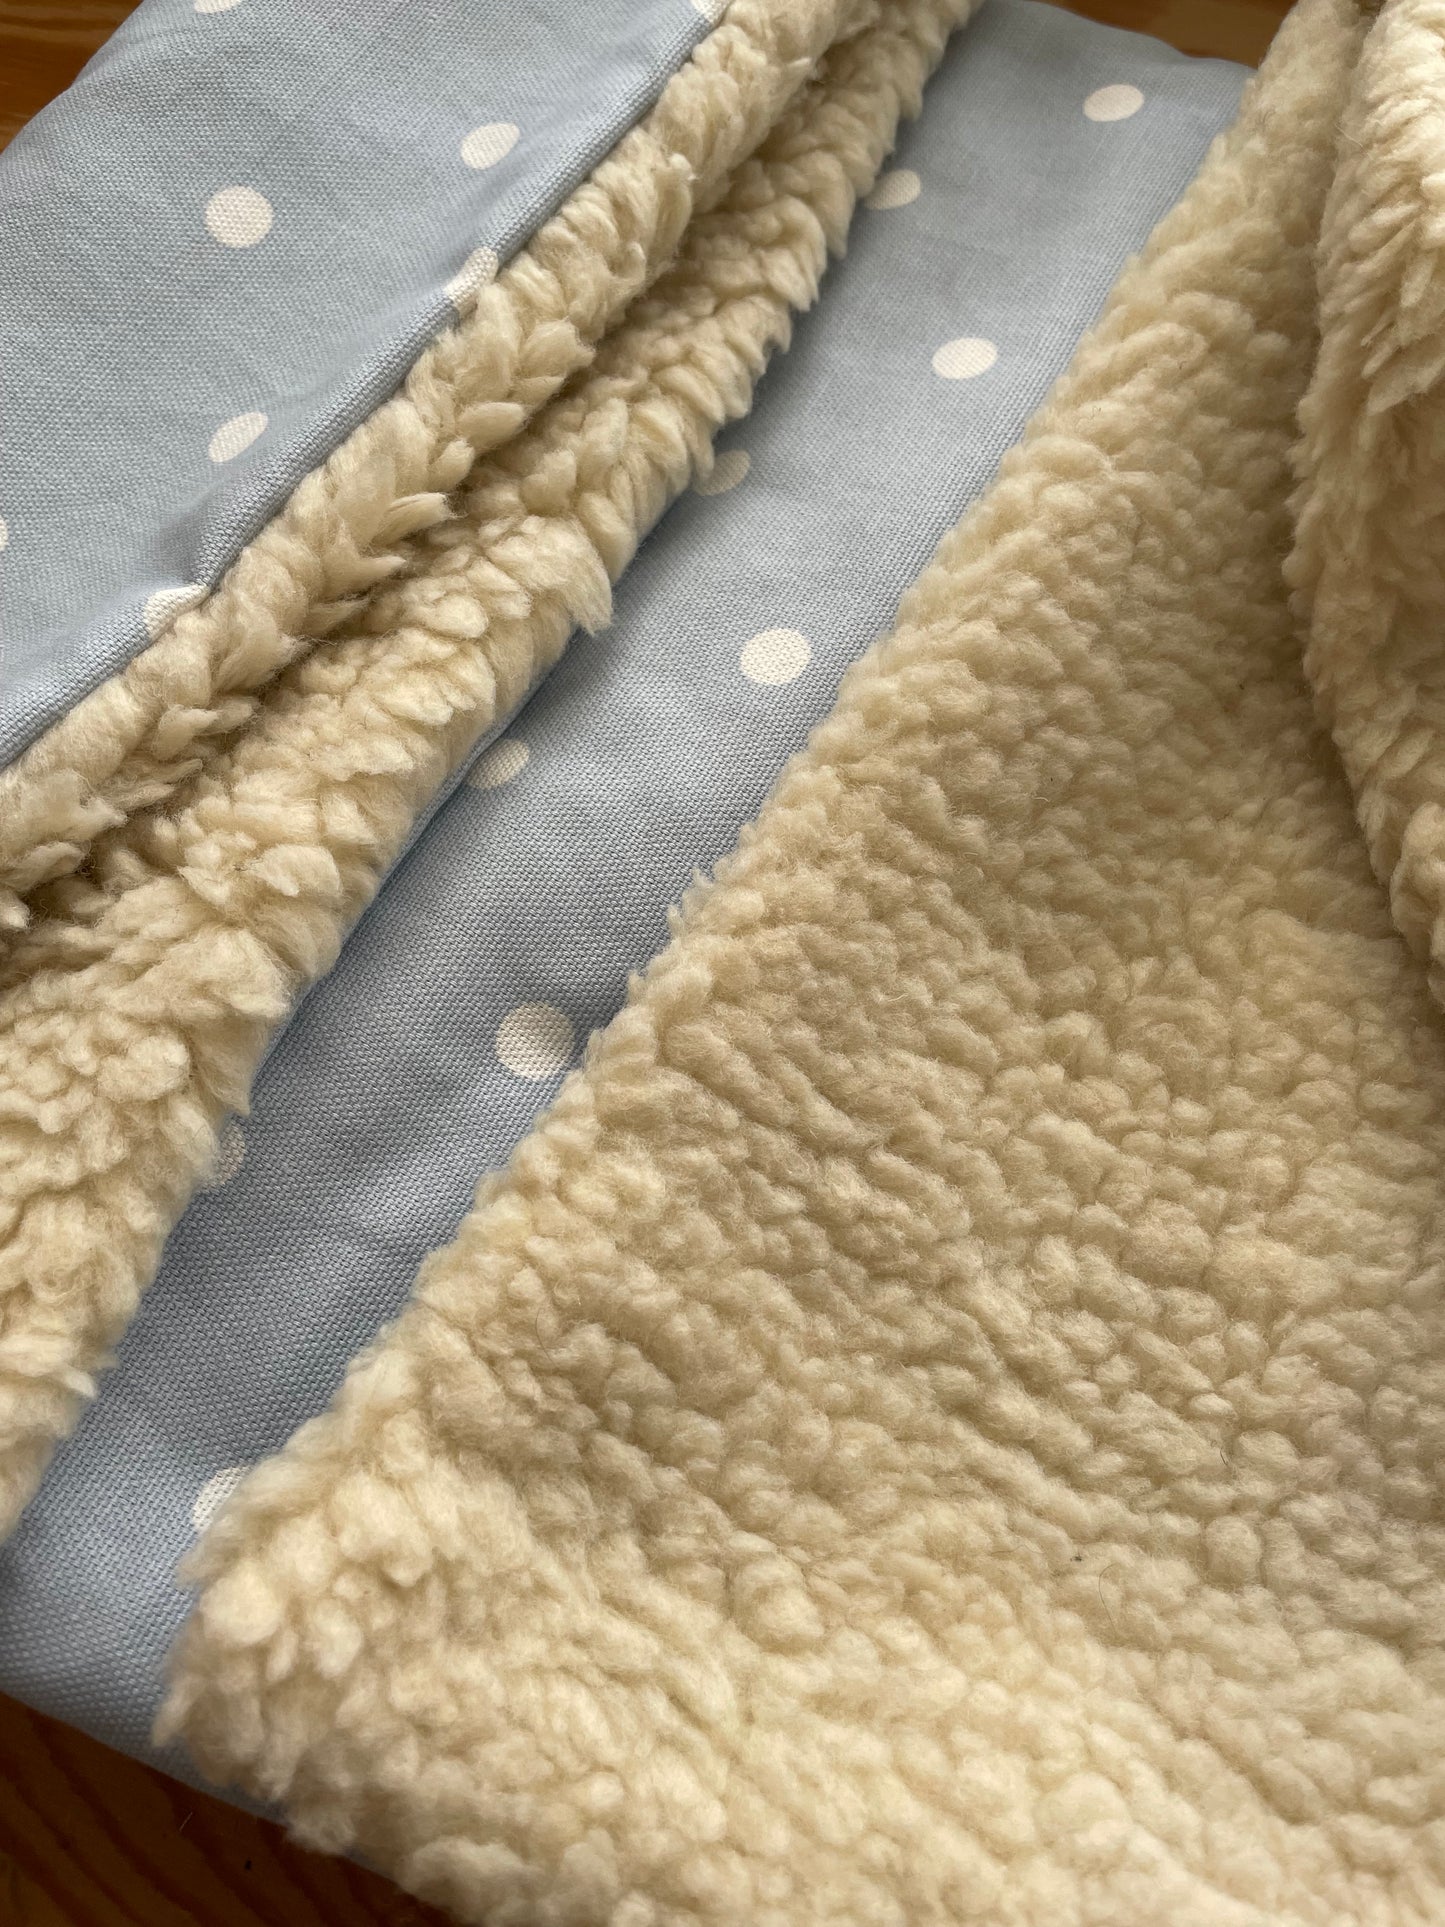 Blue Spotty Dog/Cat/Pet Blanket with lambswool sherpa backing